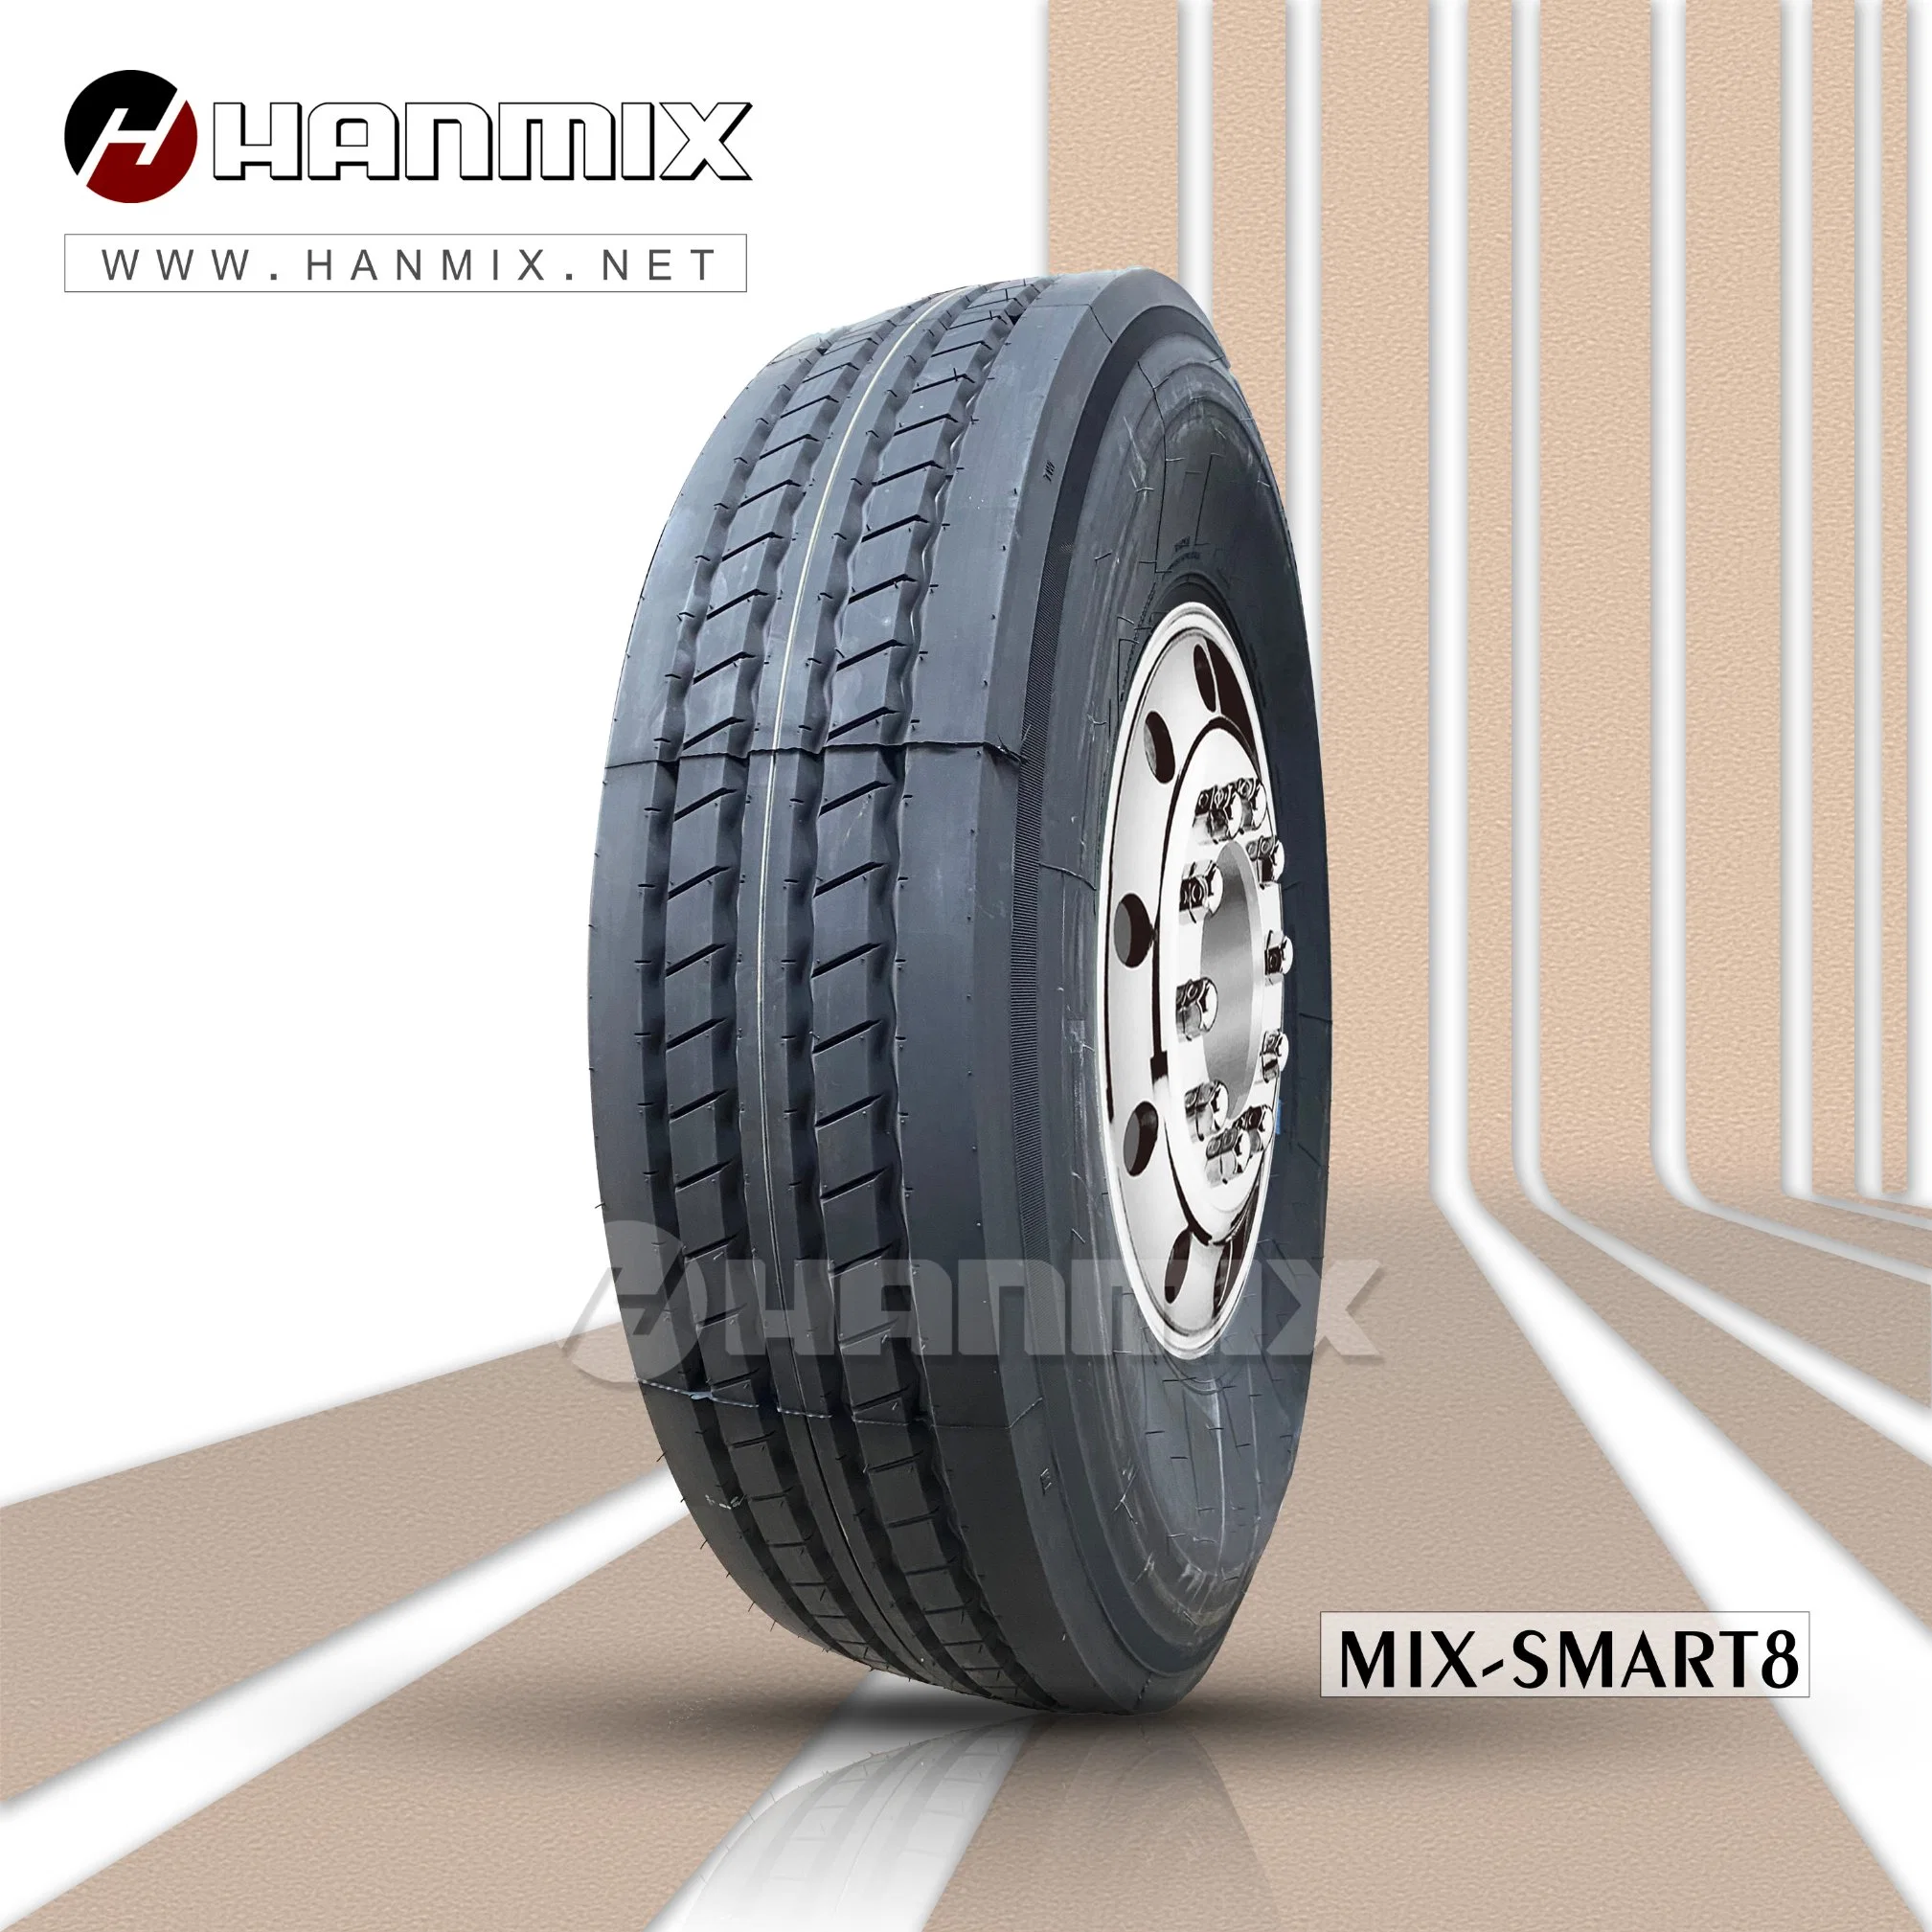 Hanmix Truck & Bus Tire Radial Tyre Long Haul Highway Standard Road All Steel Radial Truck Tyre TBR Tyre Truck and Bus Tyres 295/75r 22.511r24.5 11r22.5